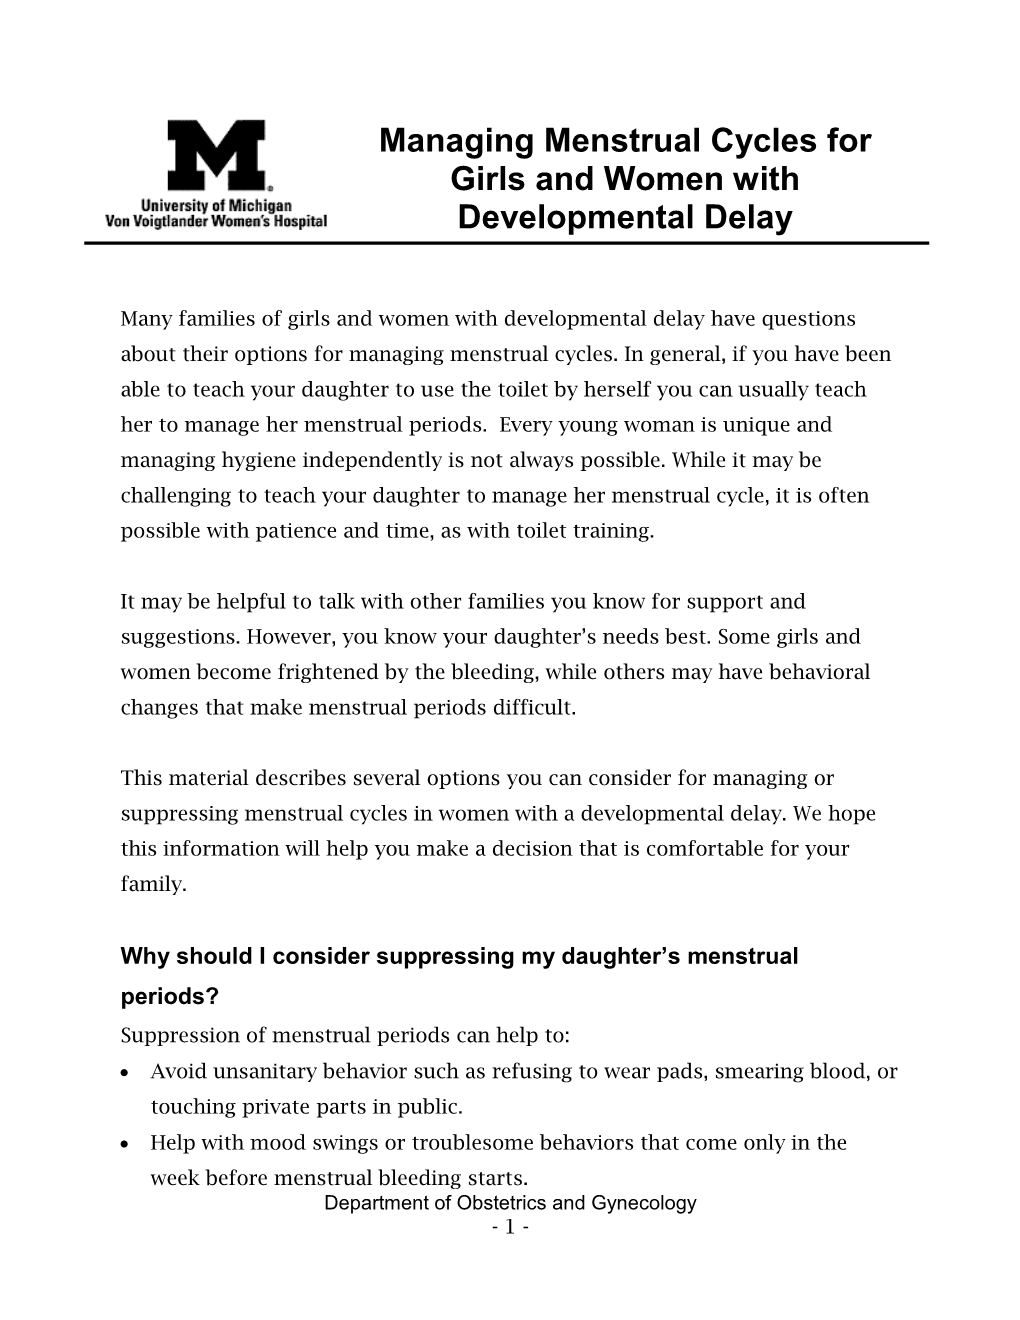 Managing Menstrual Cycles for Girls and Women with Developmental Delay